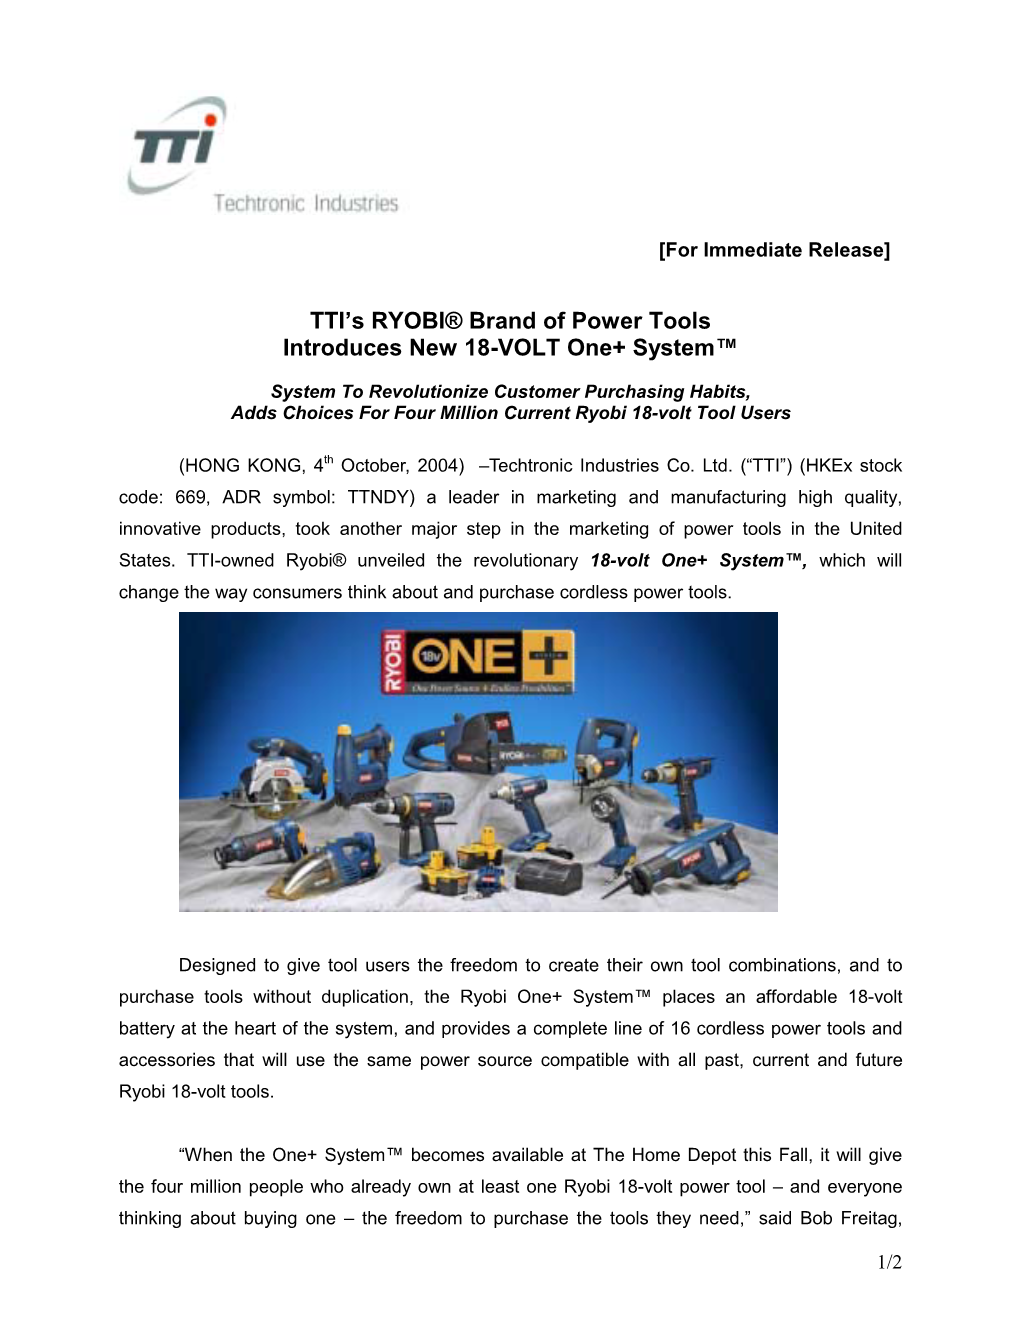 TTI's RYOBI® Brand of Power Tools Introduces New 18-VOLT One+